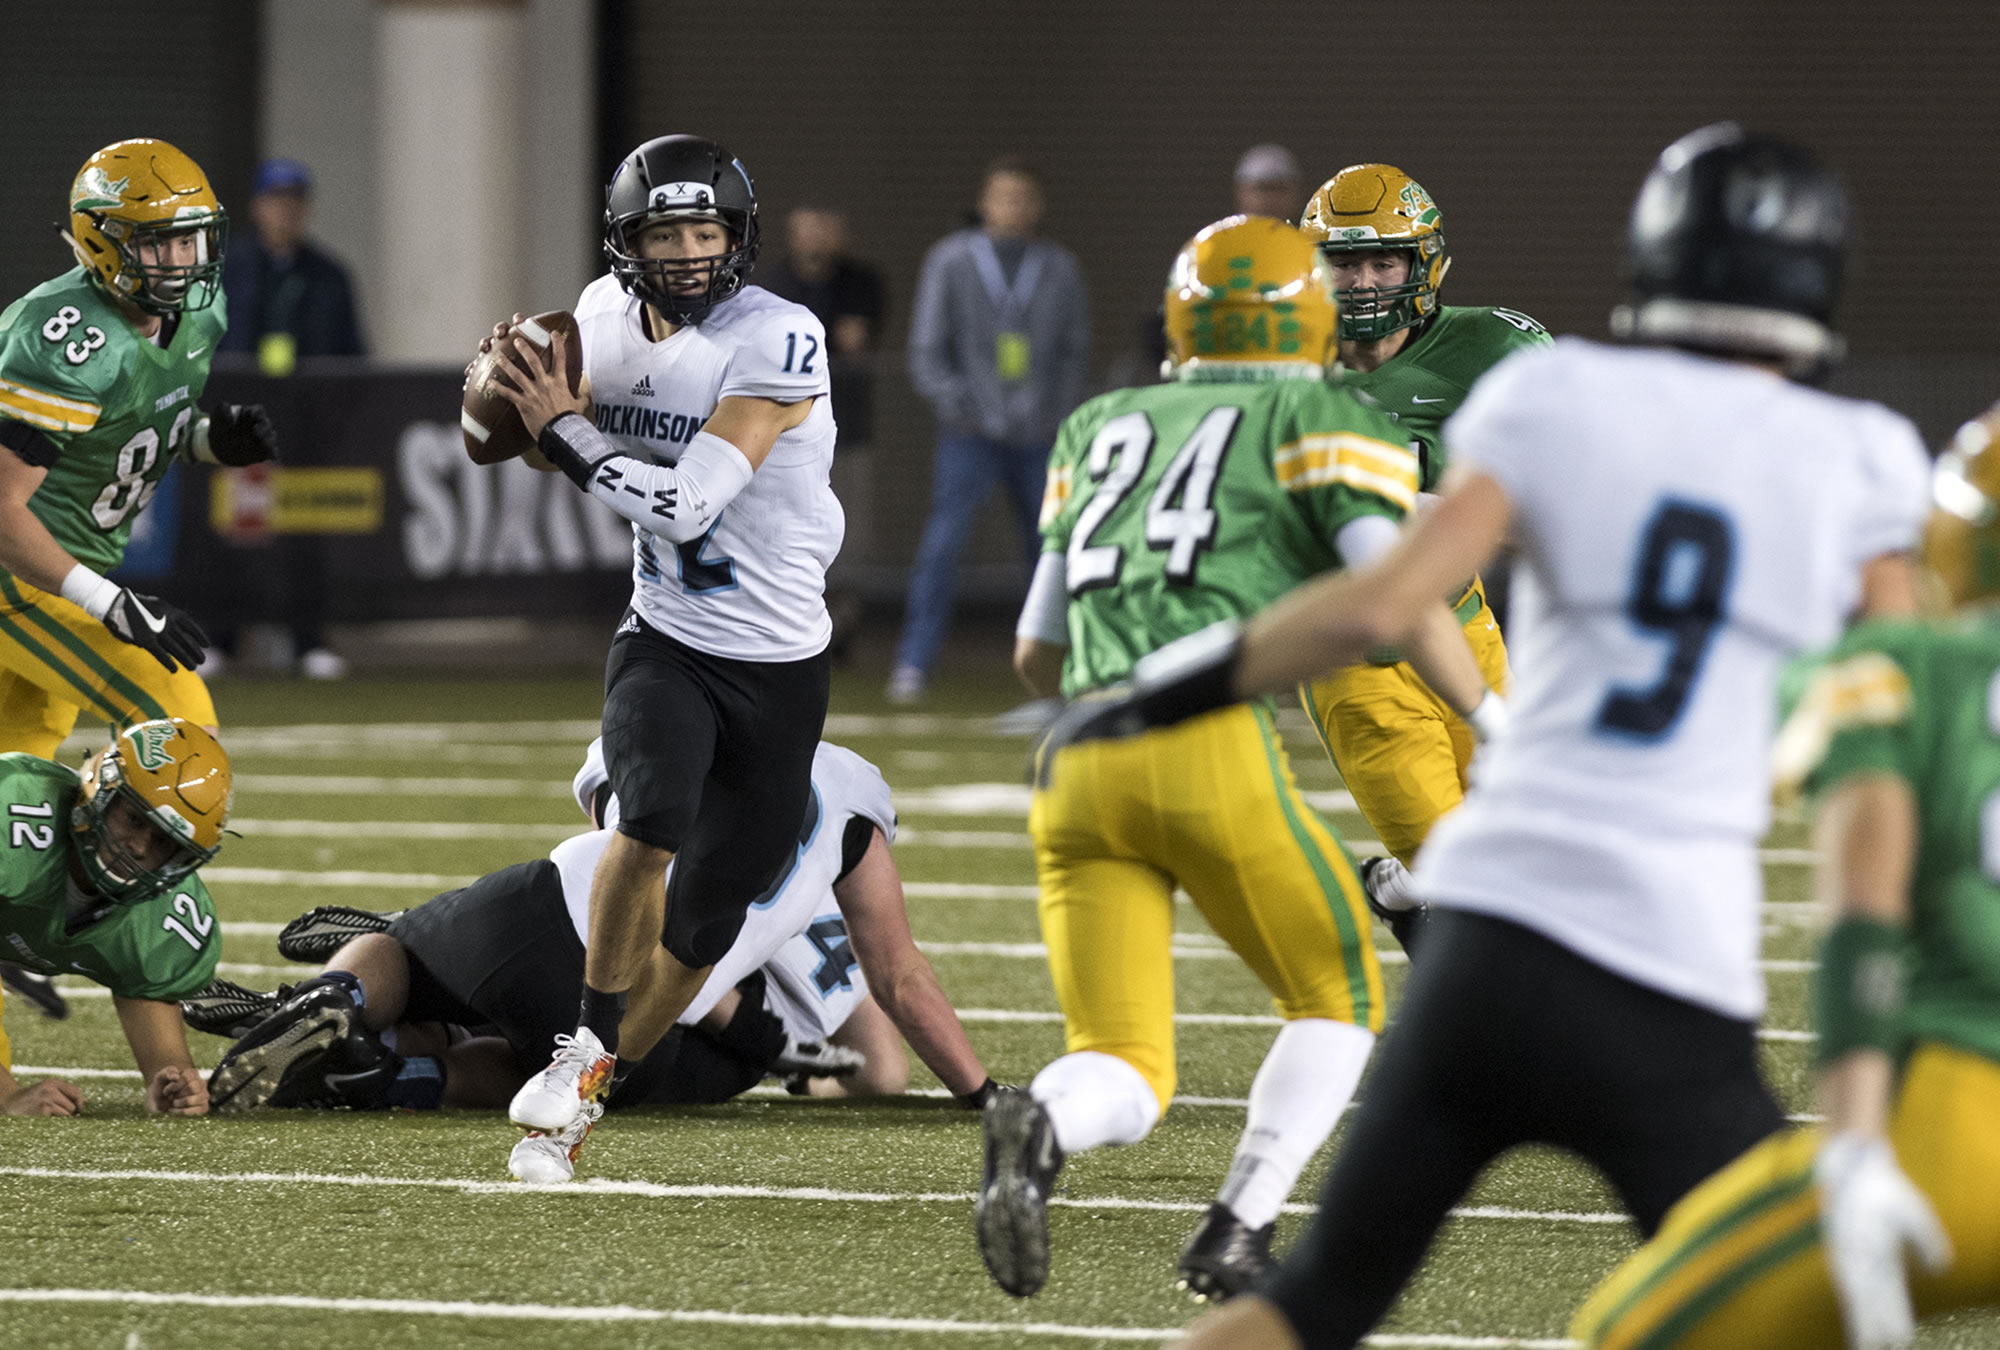 Hockinson's Canon Racanelli (12) looks for an open receiver during the 2A state football championship game against Tumwater on Saturday, Dec. 2, 2017, in Tacoma, Wash.